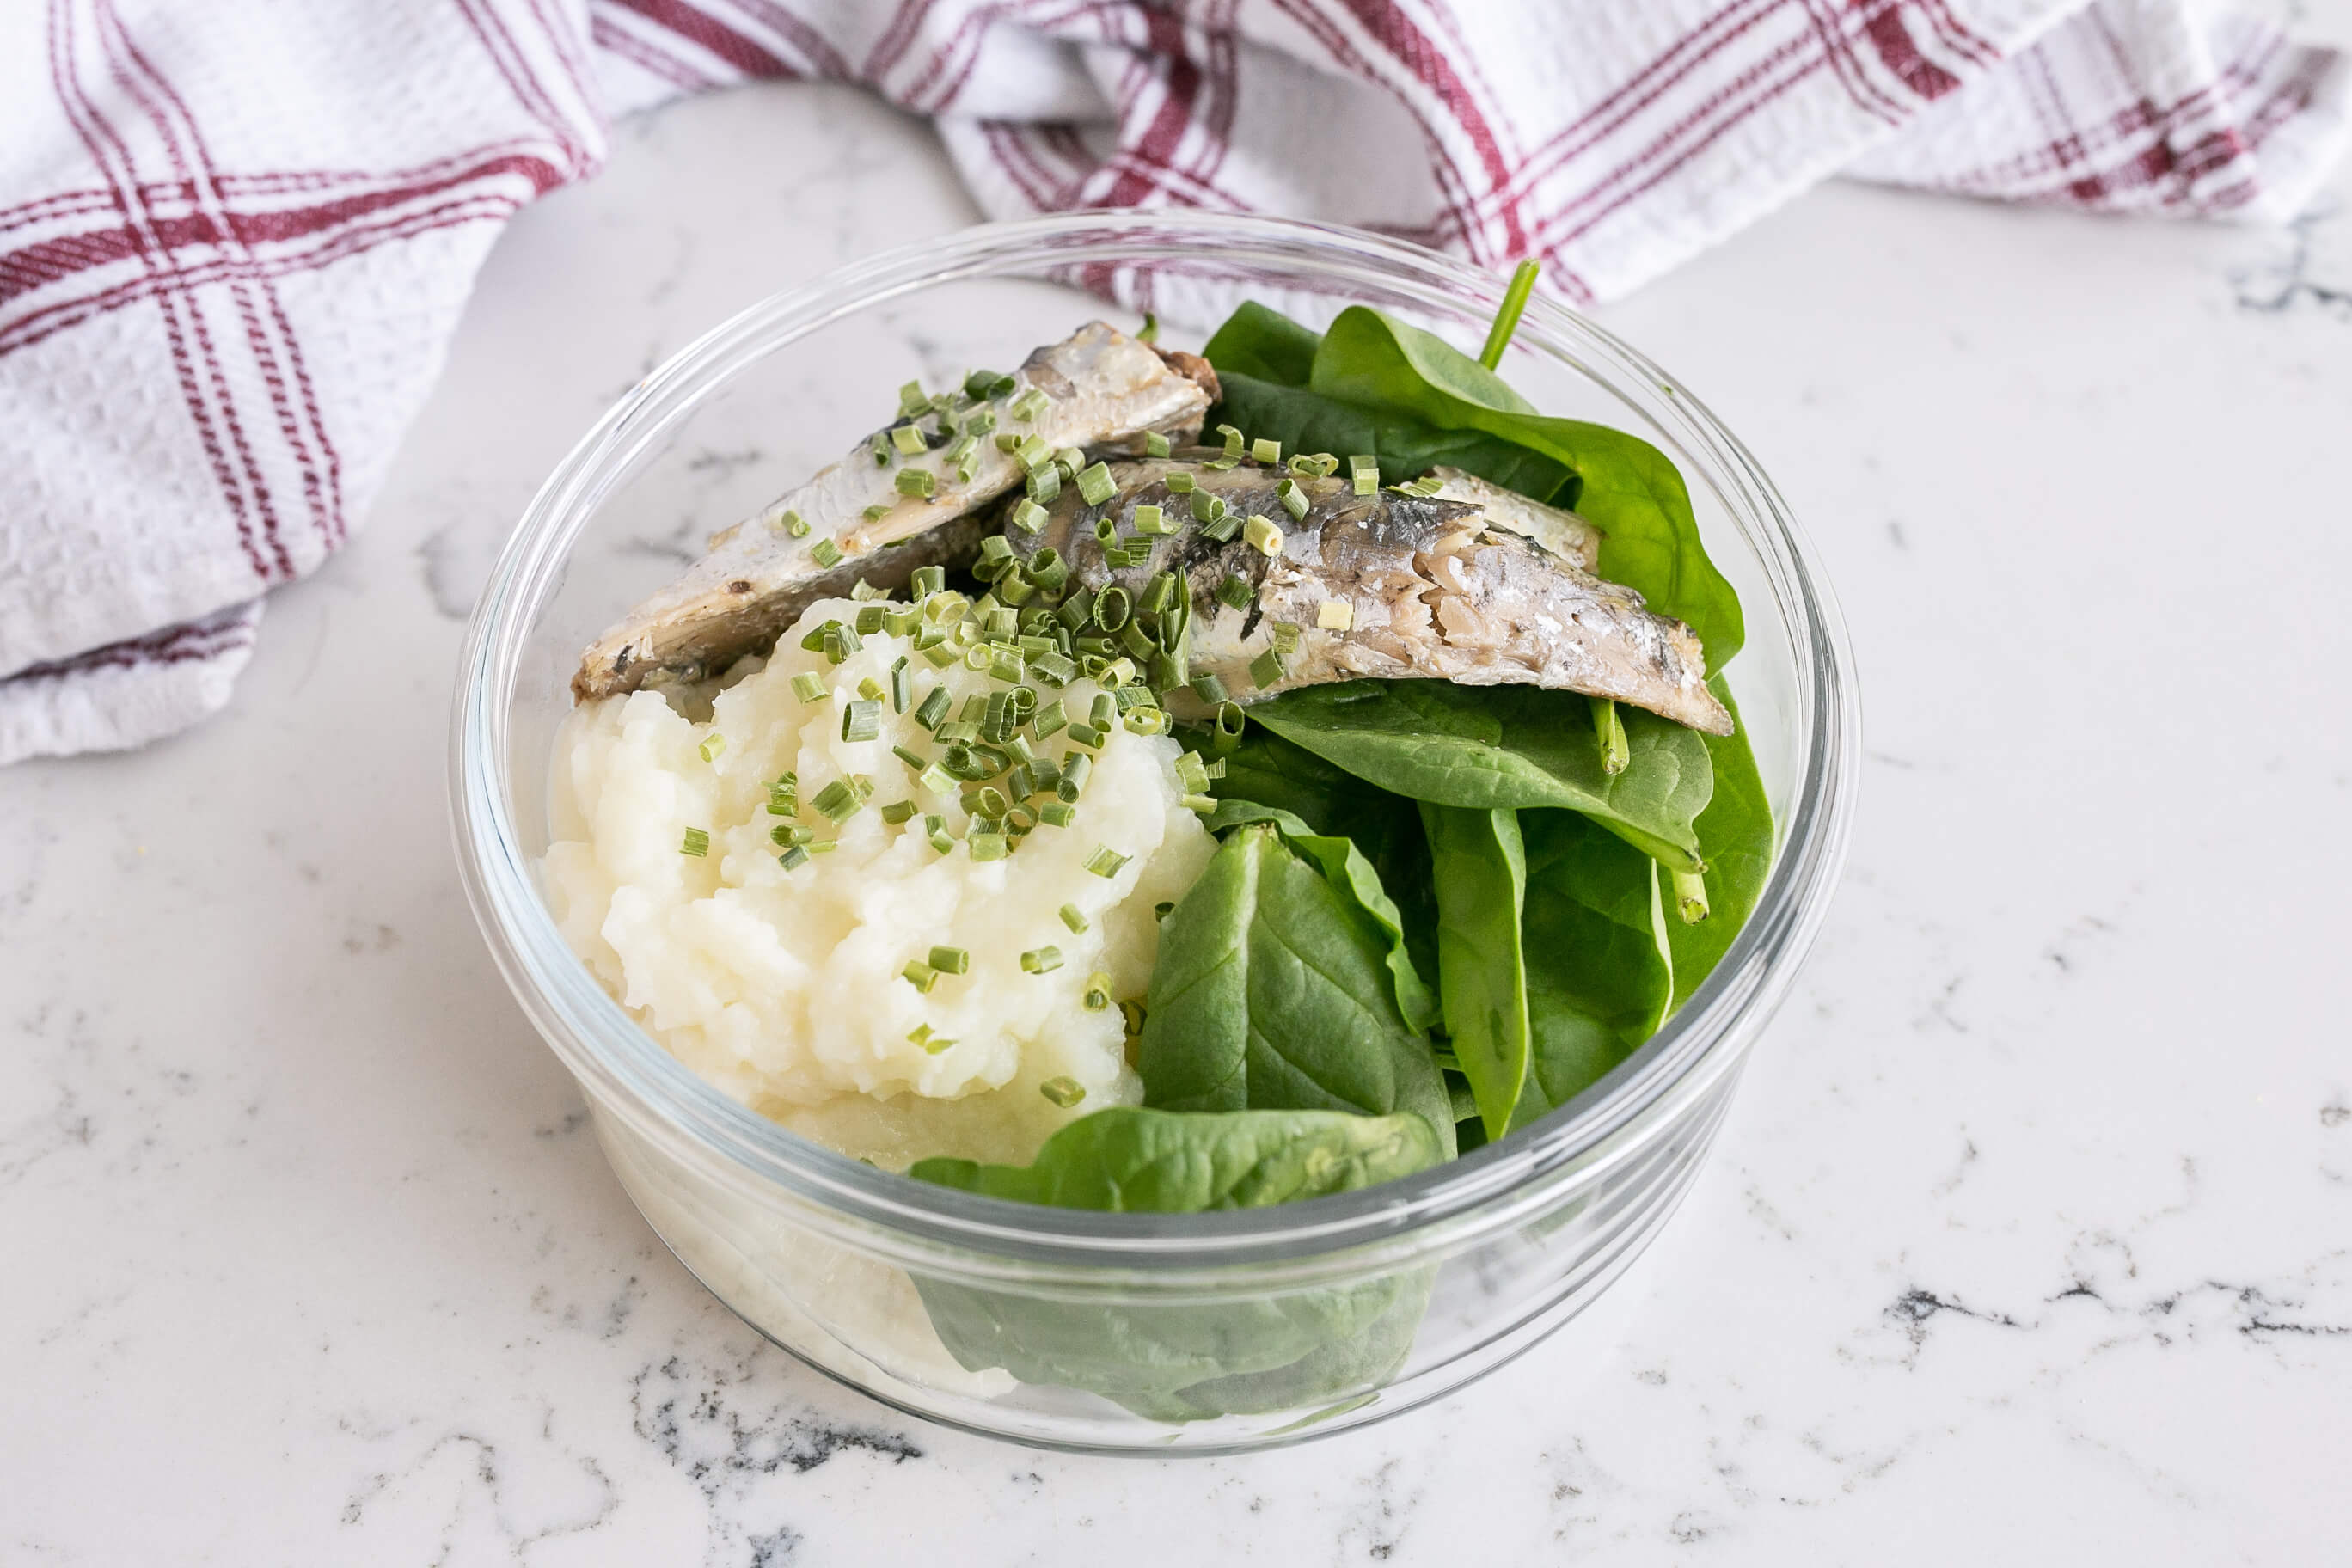 20 Specific Carbohydrate Diet Meals to Help Clients With Inflammatory Bowel Disease: Sardines & Mashed Cauliflower with Spinach